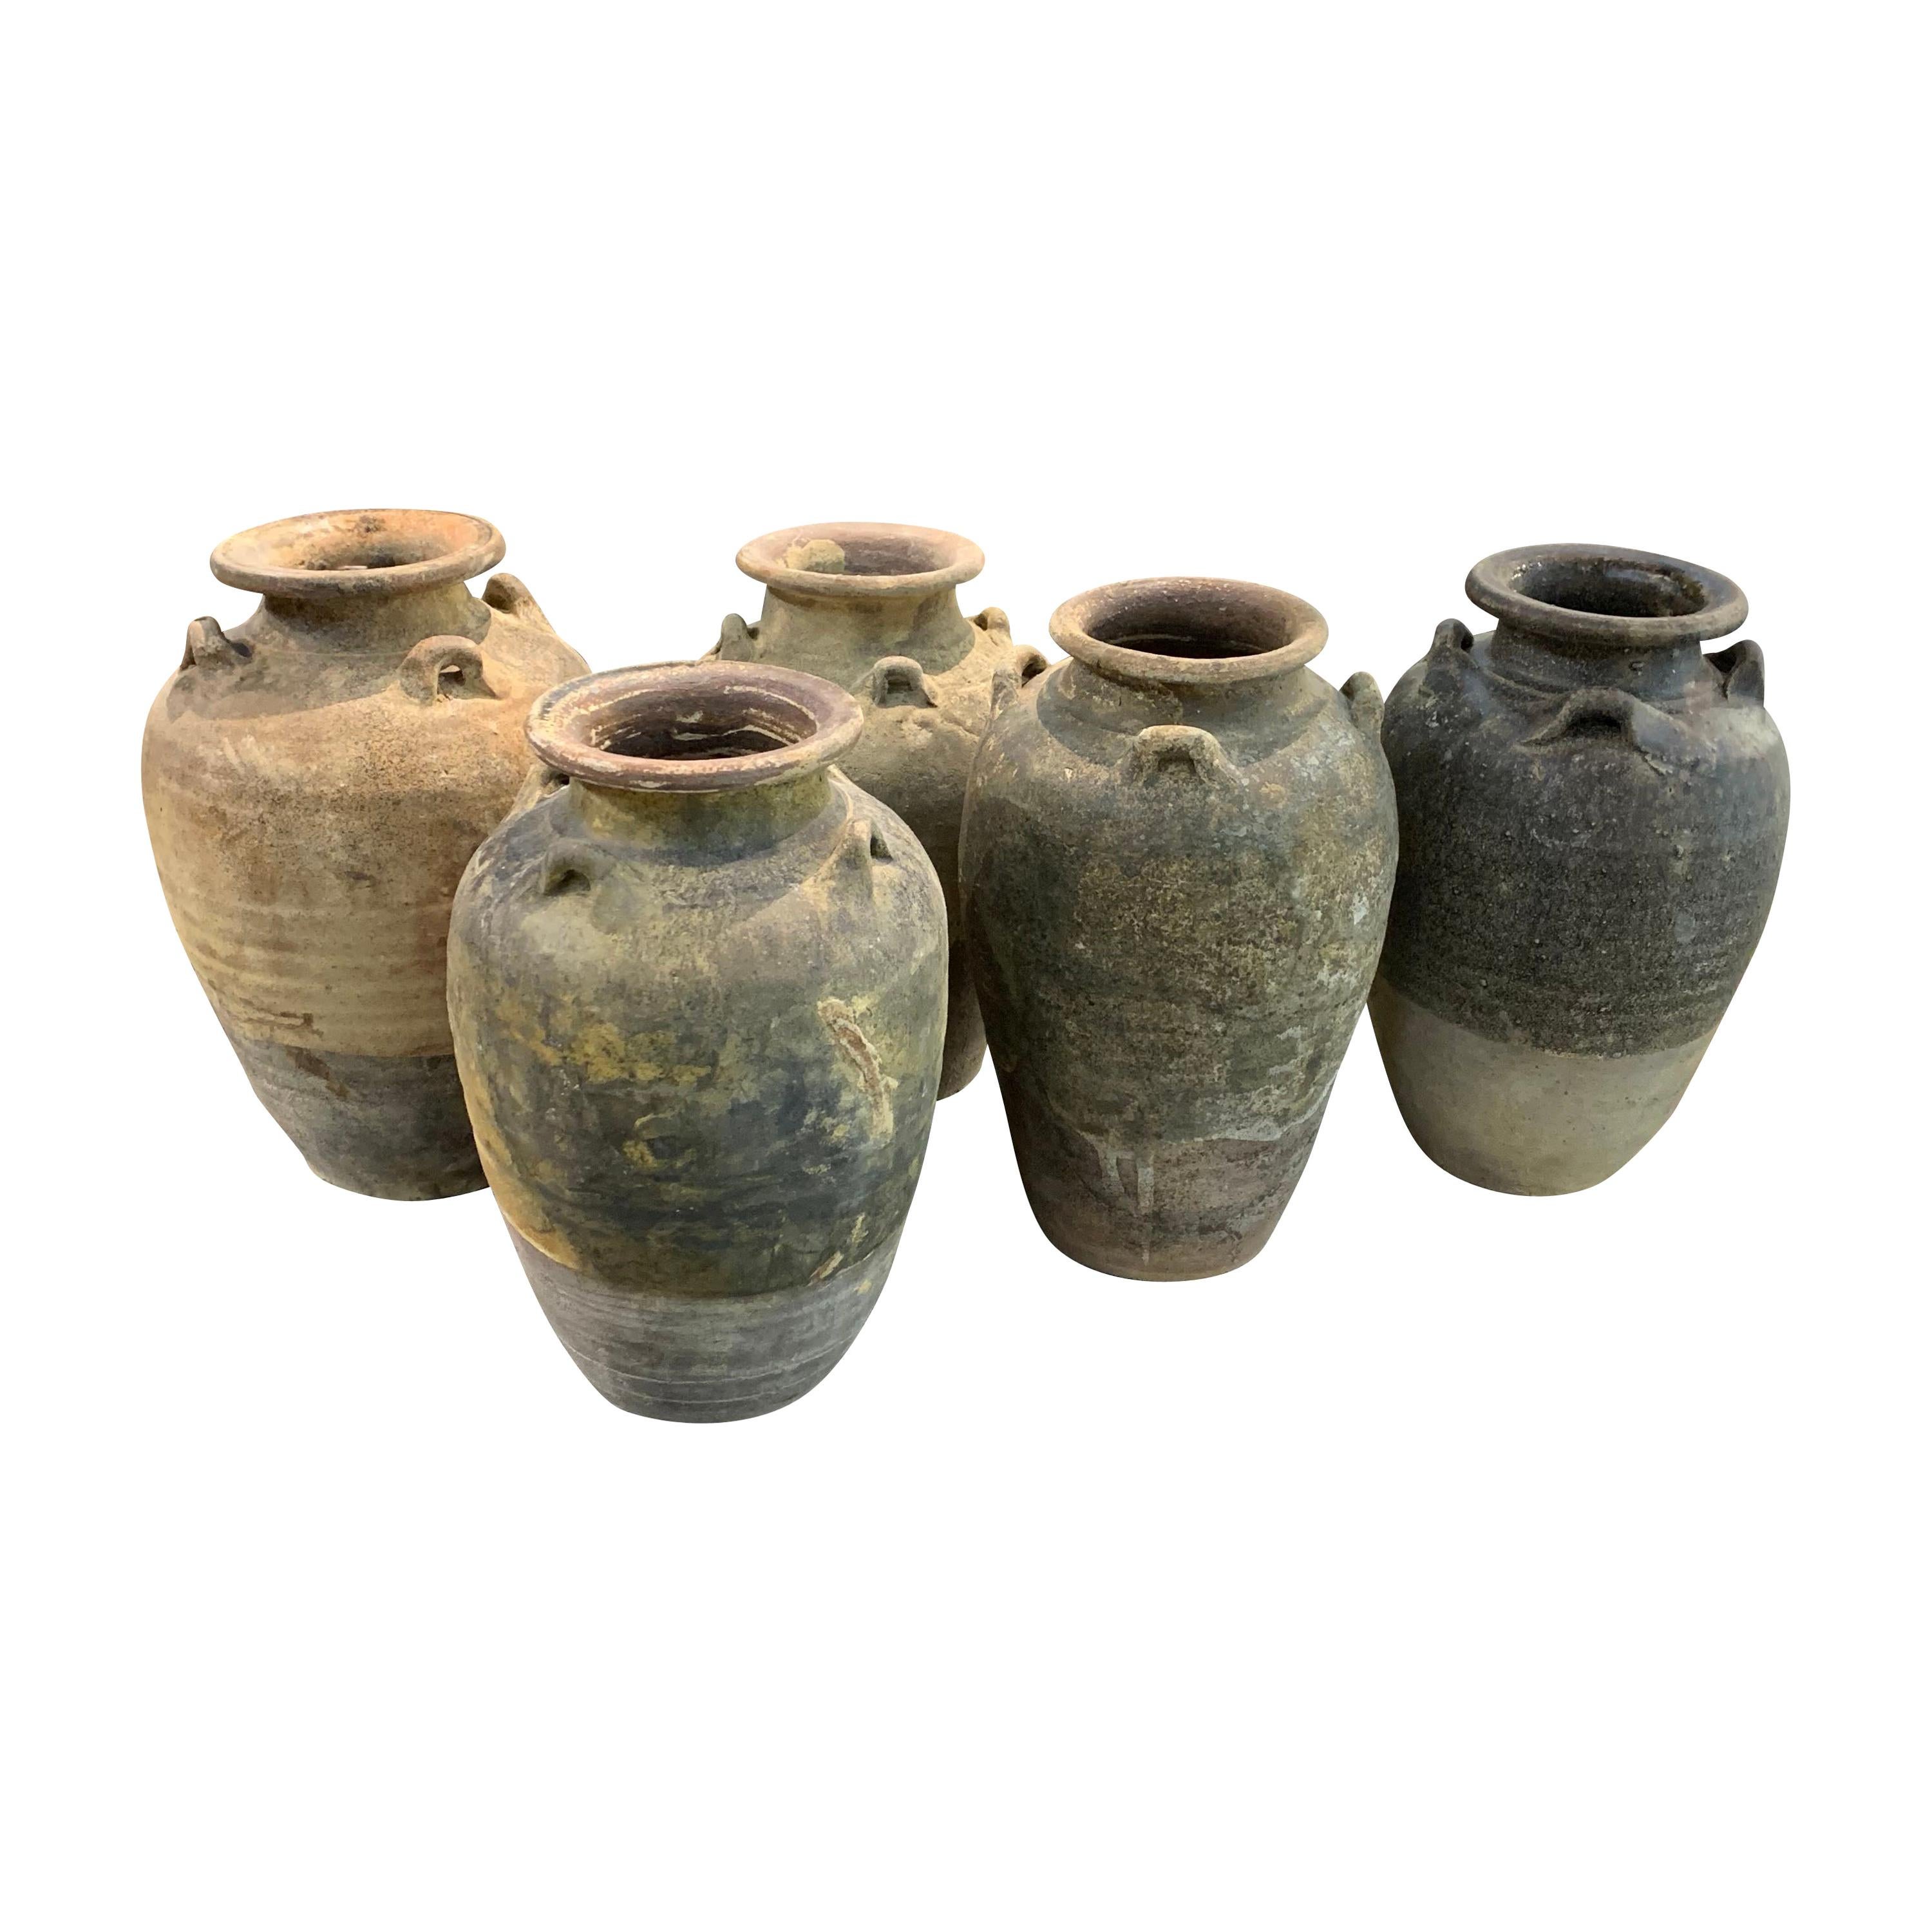 16th century Thailand Sawankhalok ceramic vase from the old city of Sawankhalok known for its pottery.
They are from the Sukhothai period.
Two pieces are available and sold individually
Beautiful natural original patina.
      